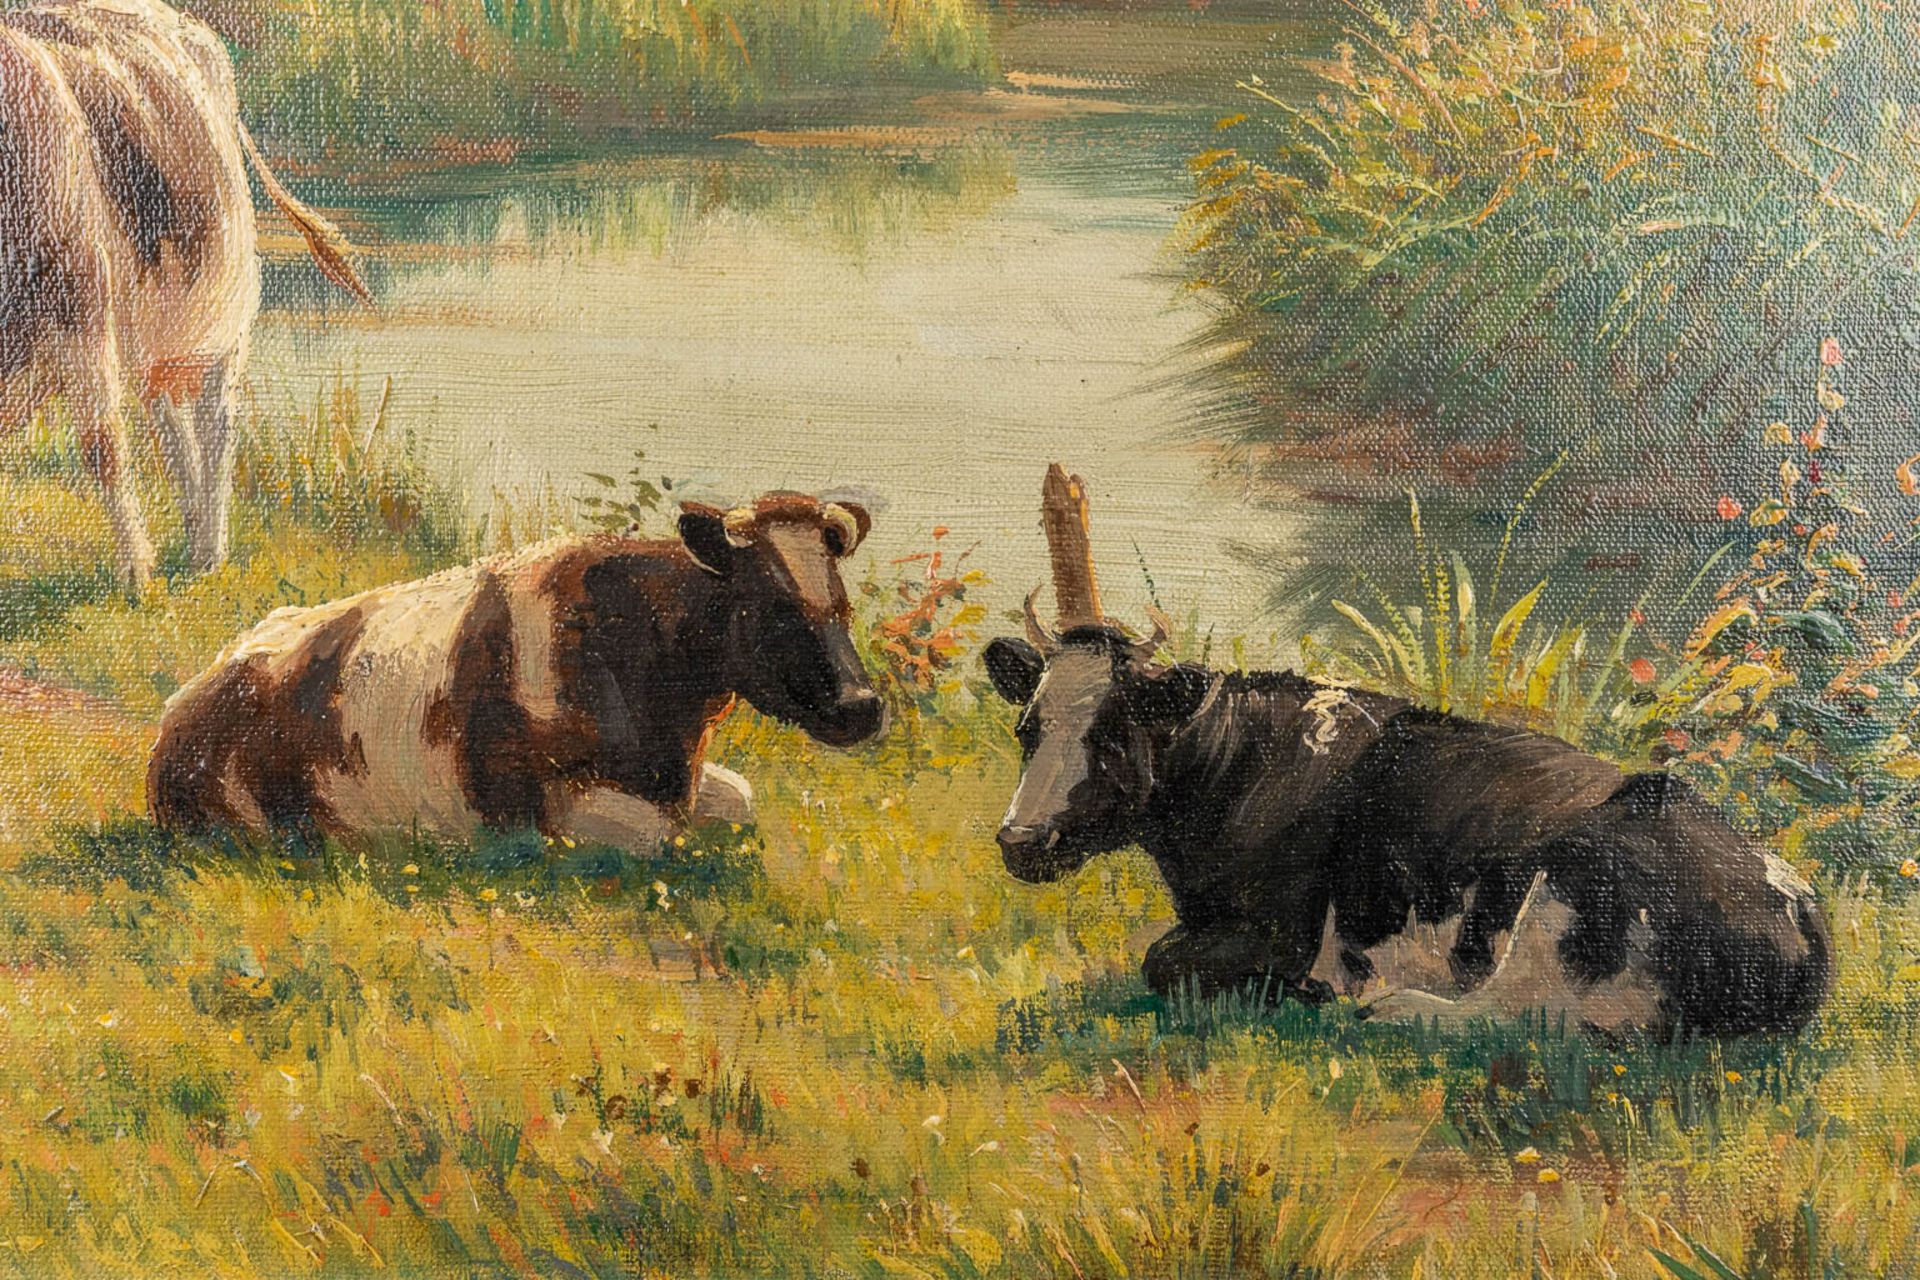 Albert CAULLET (1875-1950) 'Cows in the field' a painting, oil on canvas. (W:70 x H:50 cm) - Image 5 of 7